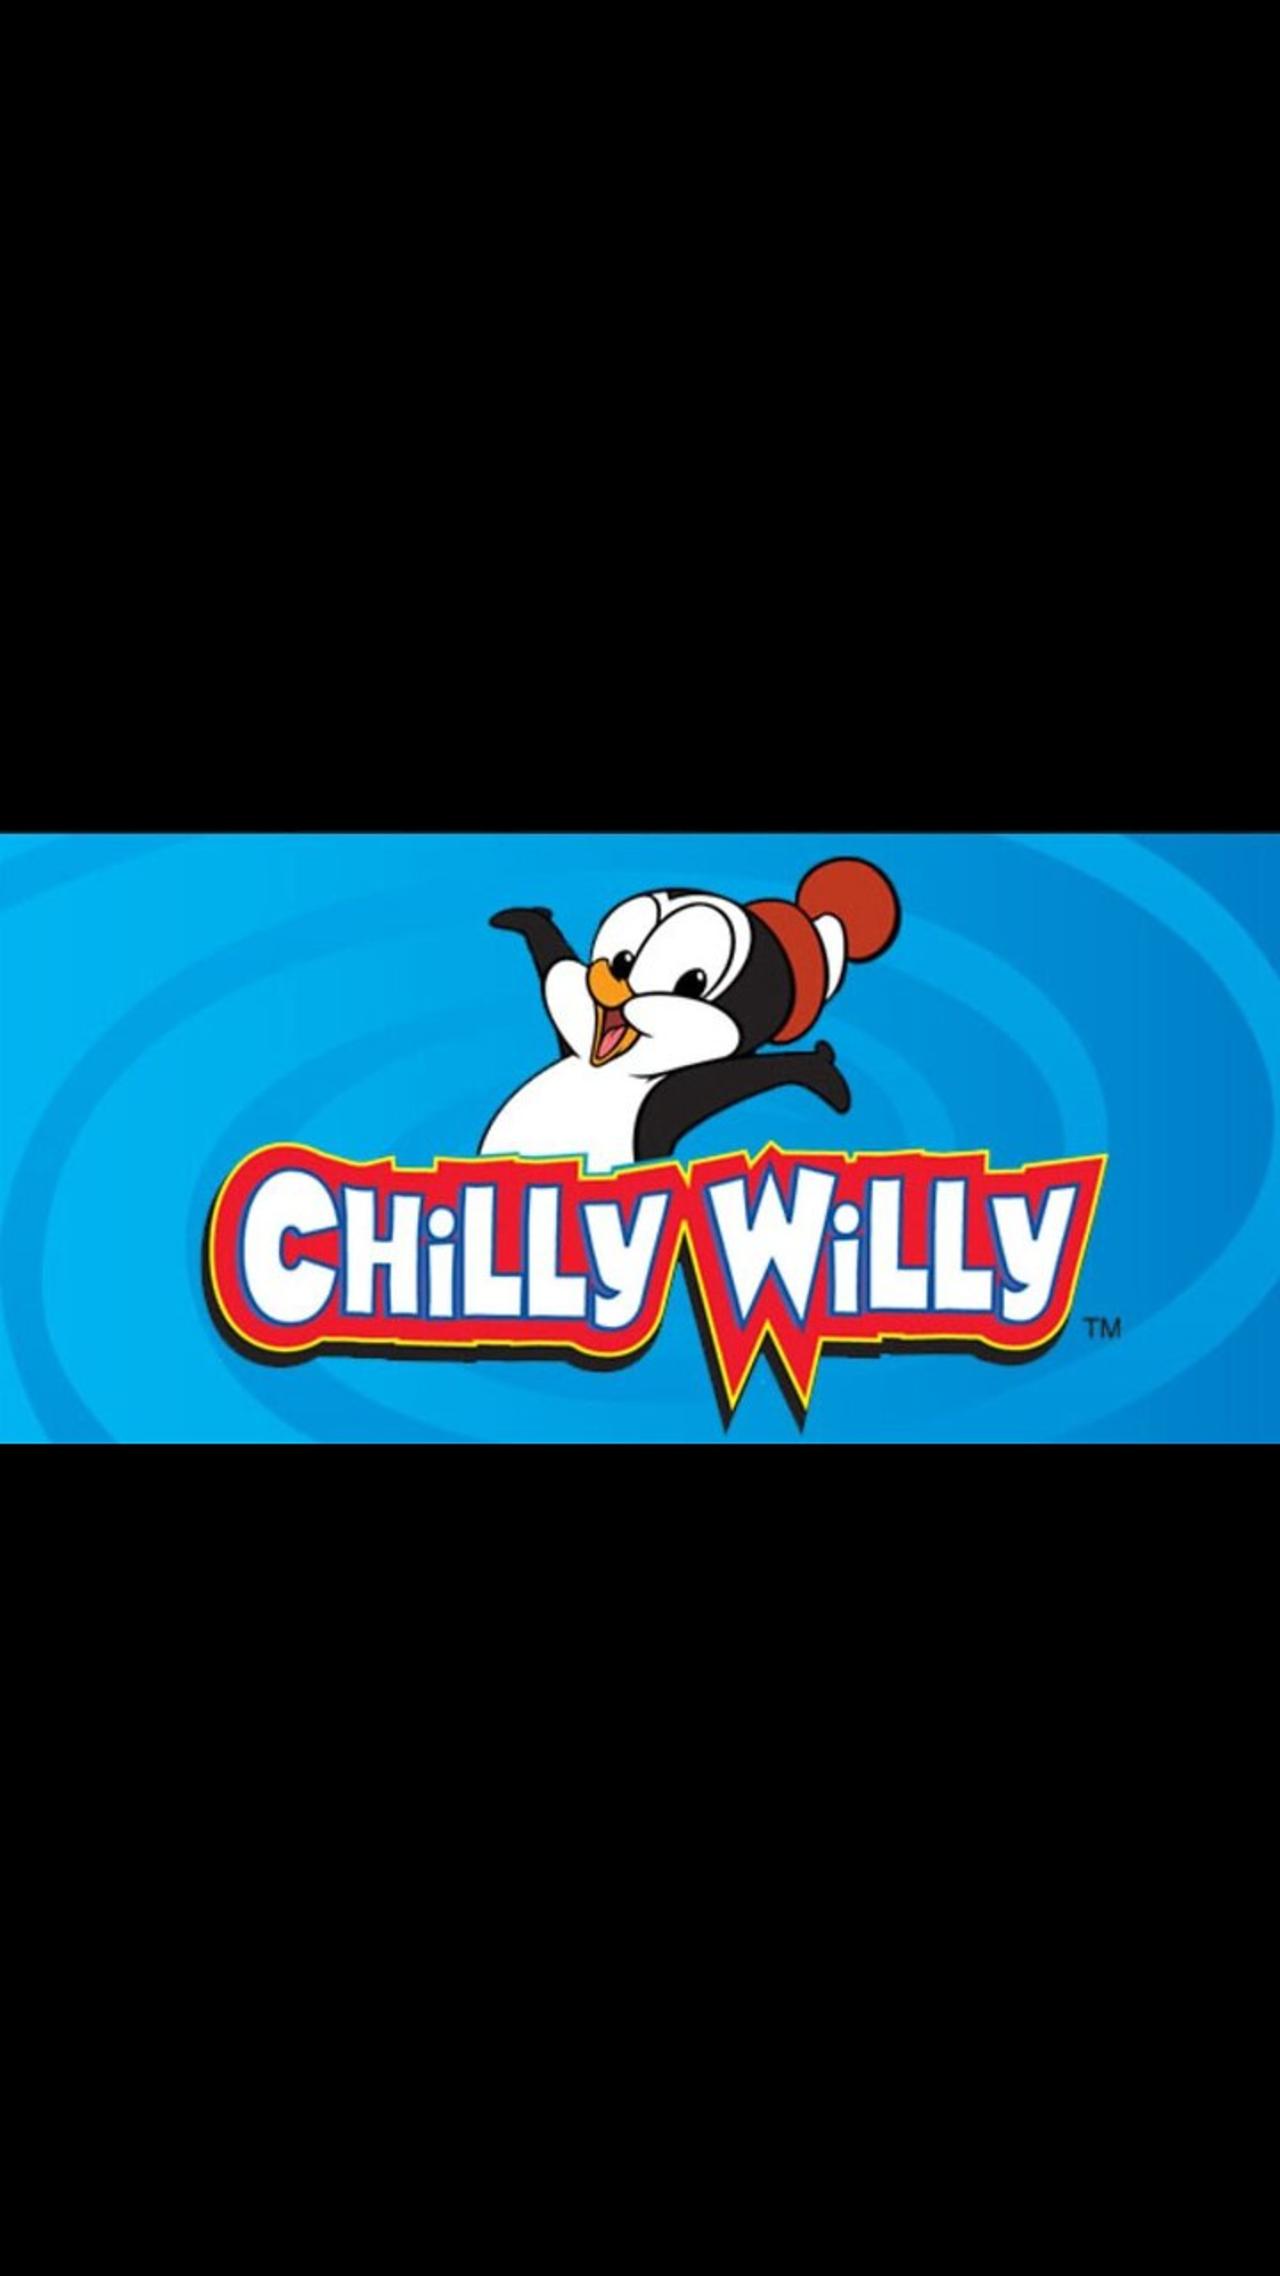 "Chilly Willy"